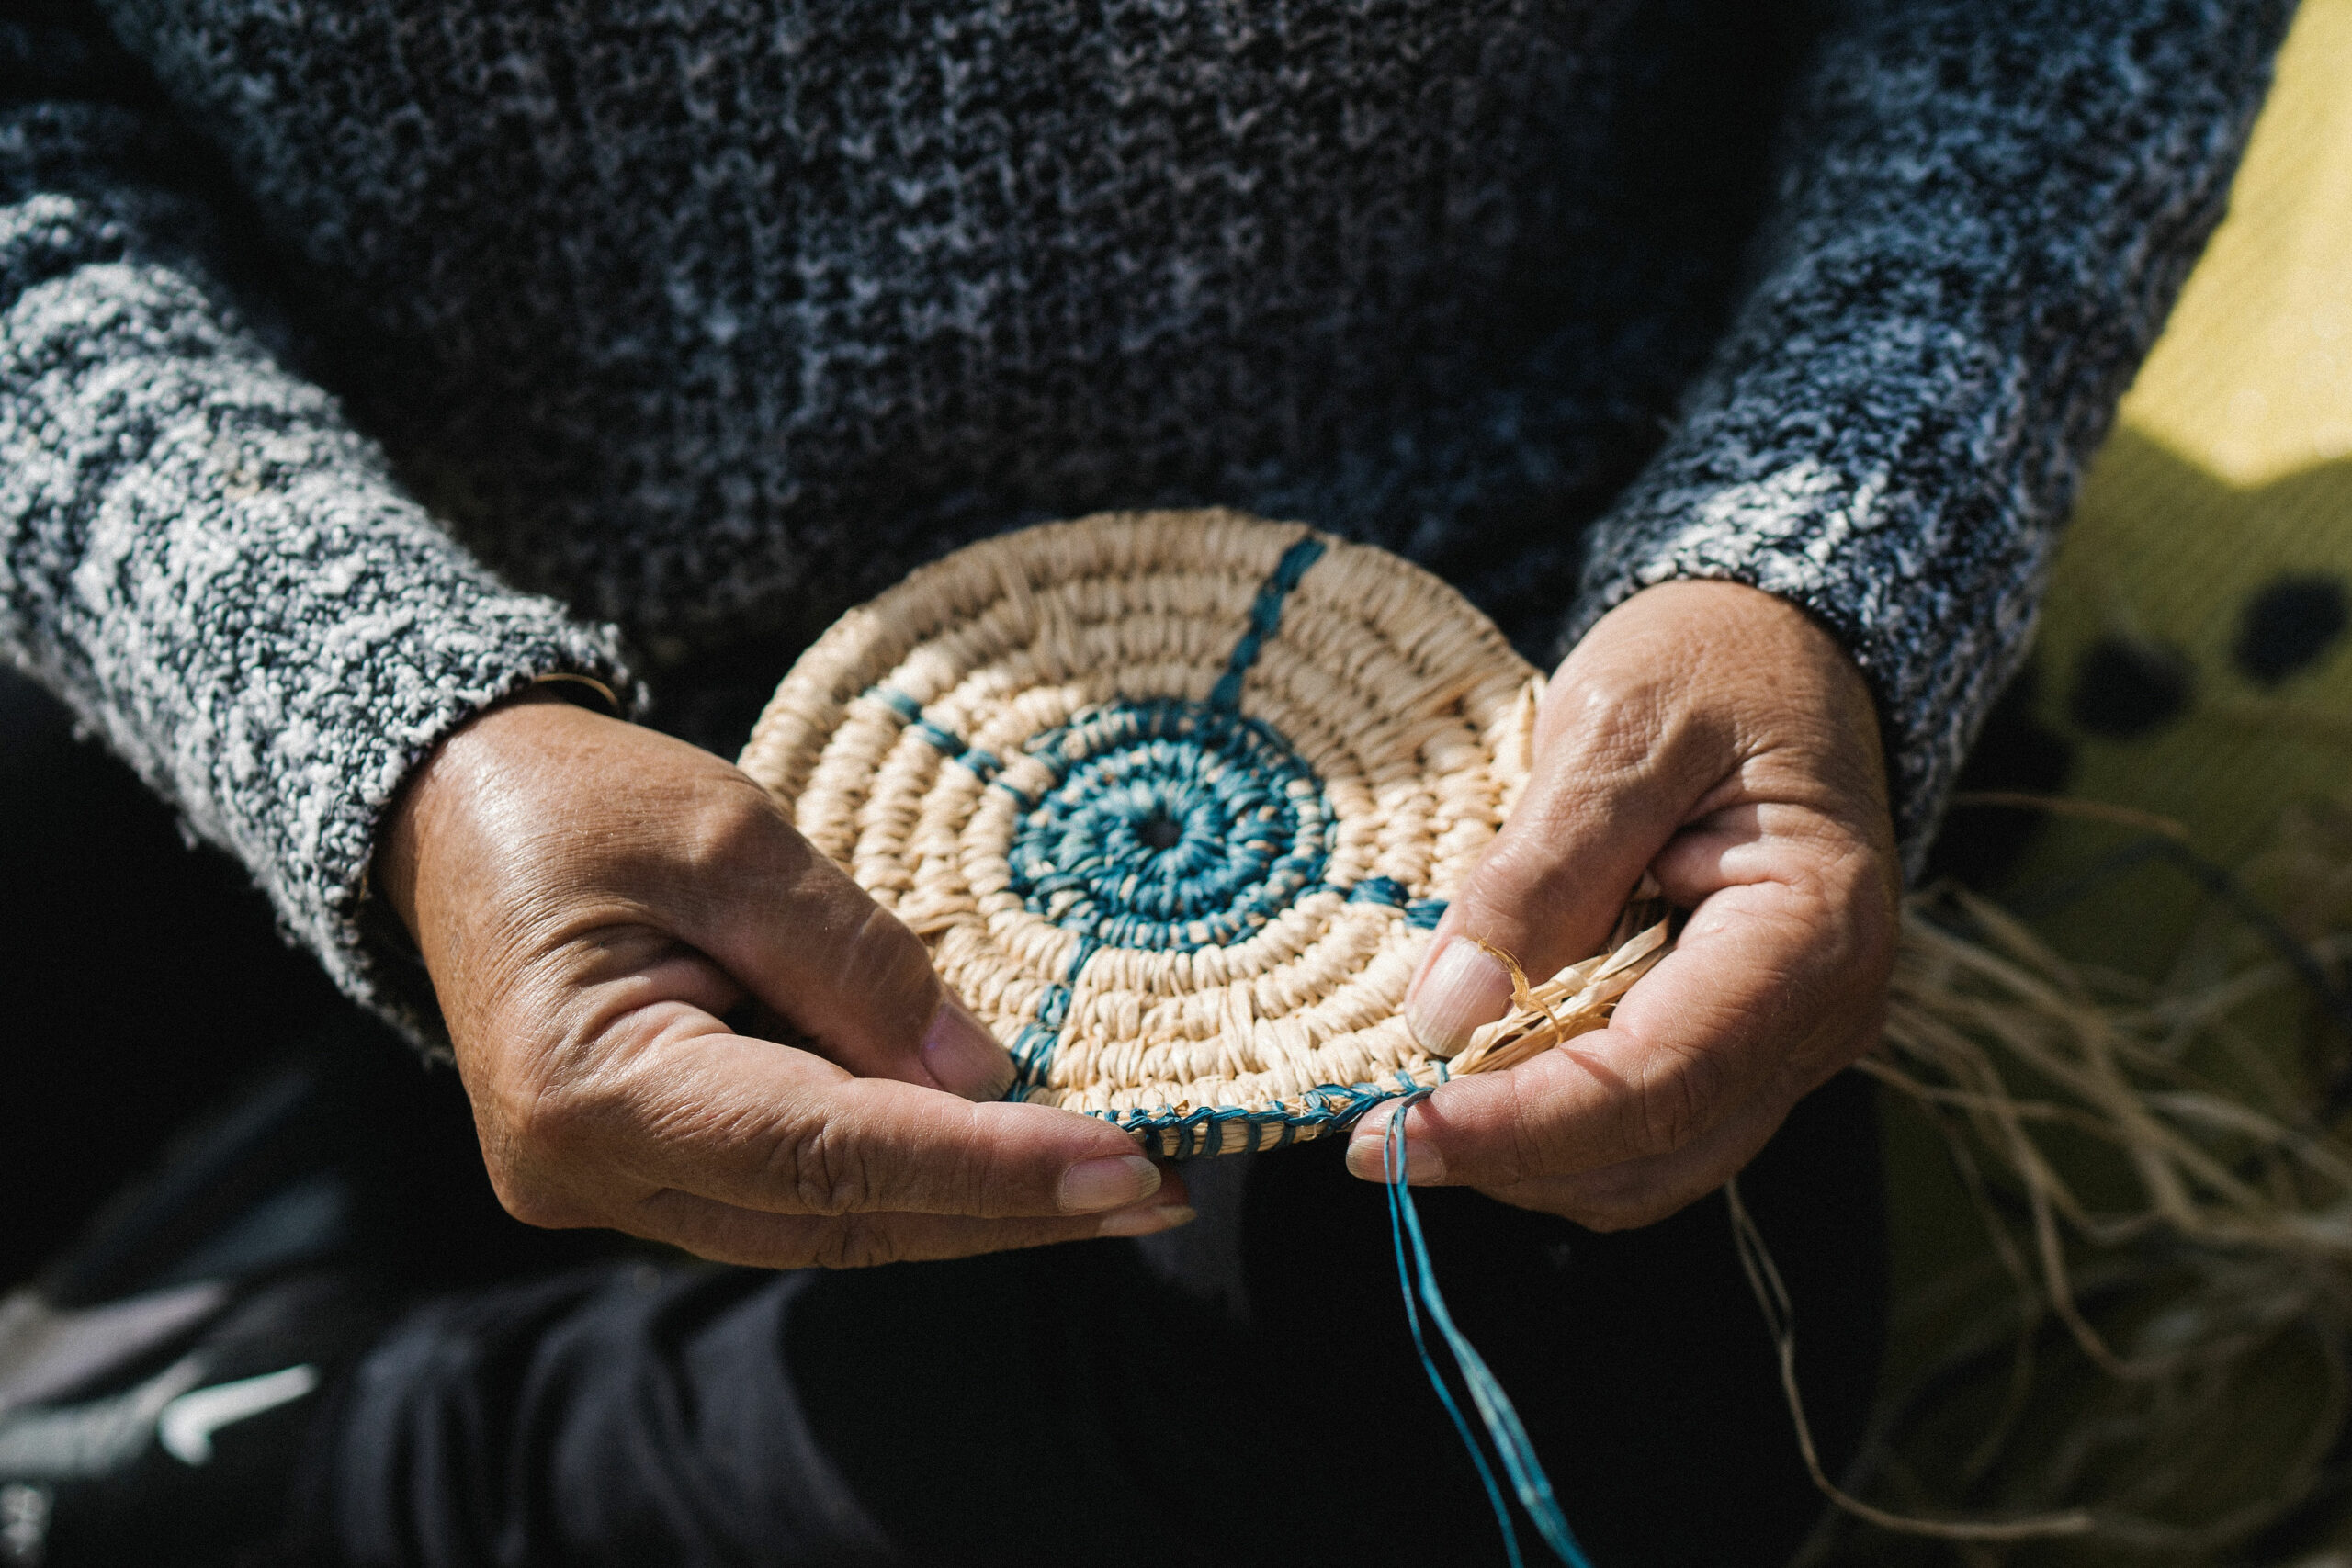 CONNECT TO COUNTRY (Jan 7) - BASKET WEAVING WORKSHOP IN NAROOMA WITH ELDER PATRICIA ELLIS FROM MINGA ABORIGNAL CULTURAL SERVICES